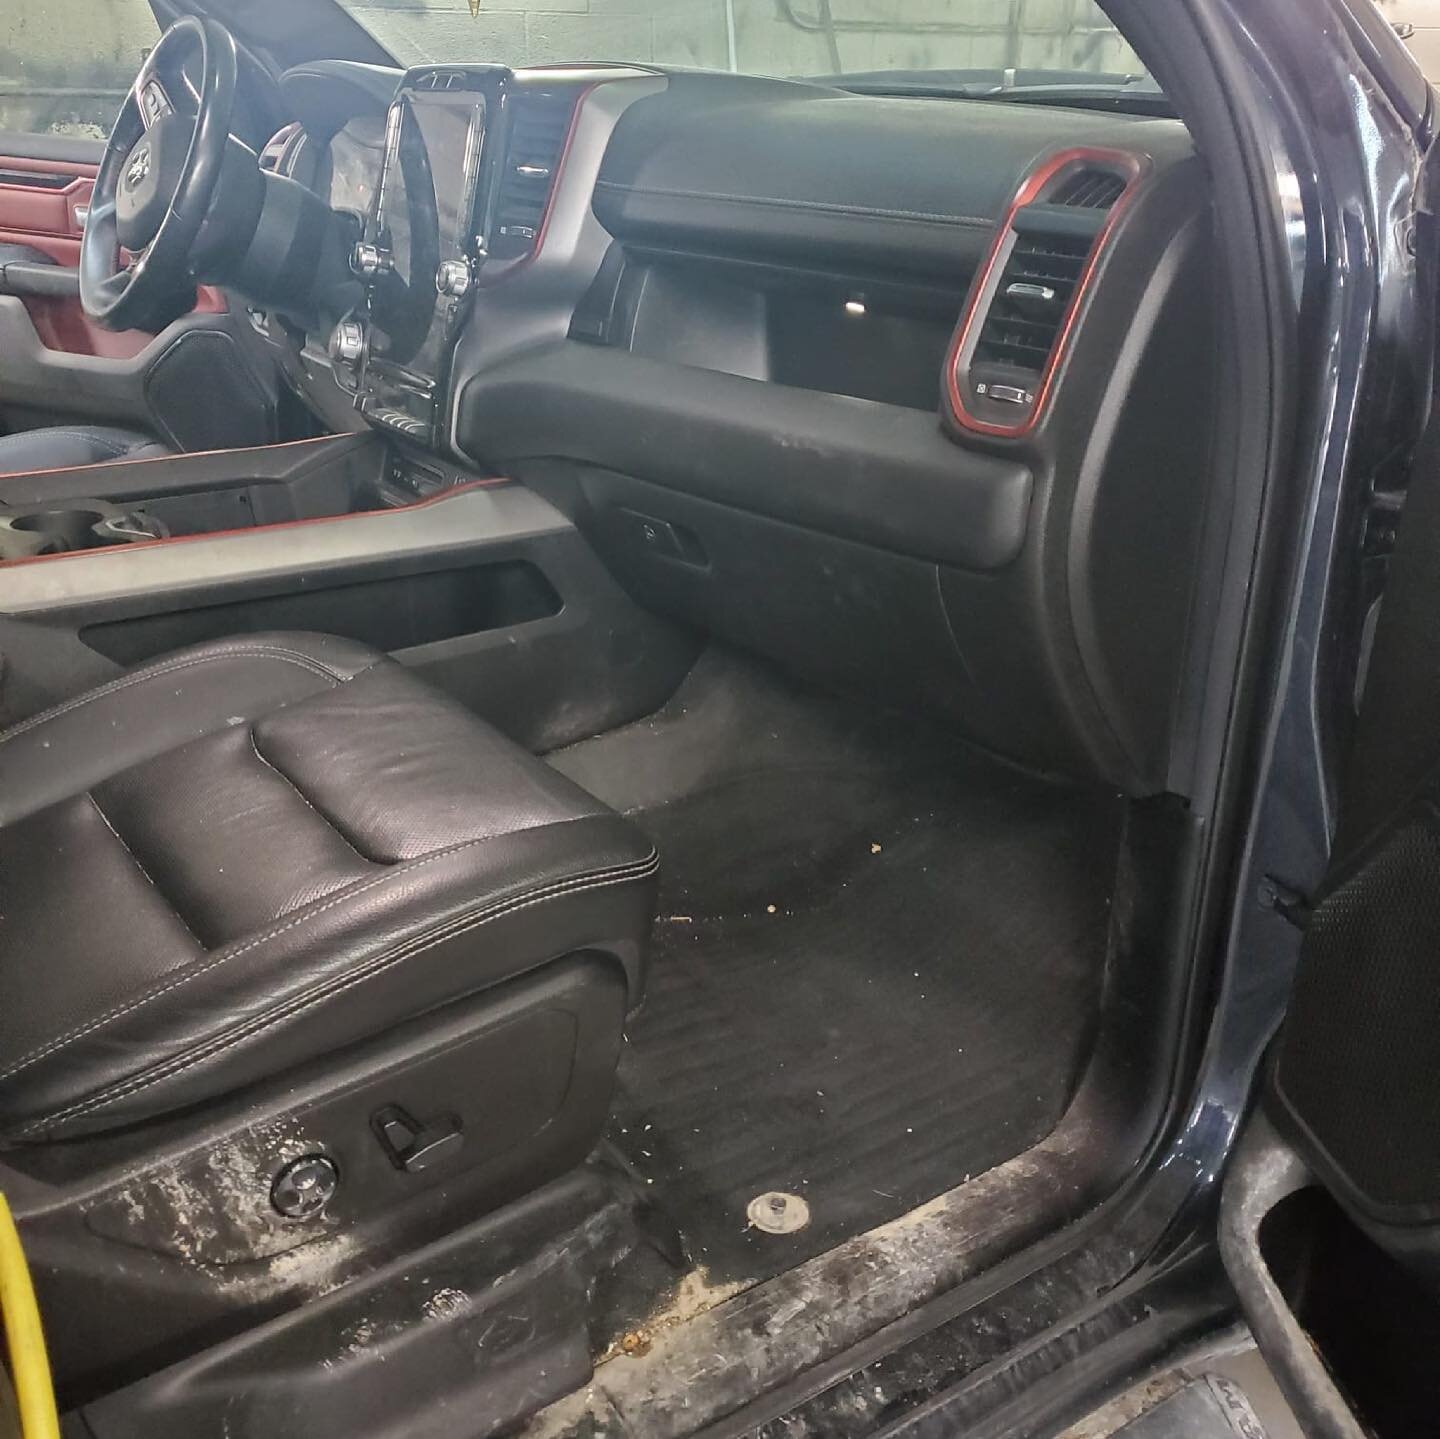 Attention to detail is key !!!!
&nbsp;
➢ Leather clean and condition
➢ Carpet shampoo
&nbsp;
&nbsp;
At Final Touch Auto Center we are your ONE STOP AUTO DETAILING CENTER!
&nbsp;
Additional available services:
&nbsp;
➢ all needed bodywork and cracked 